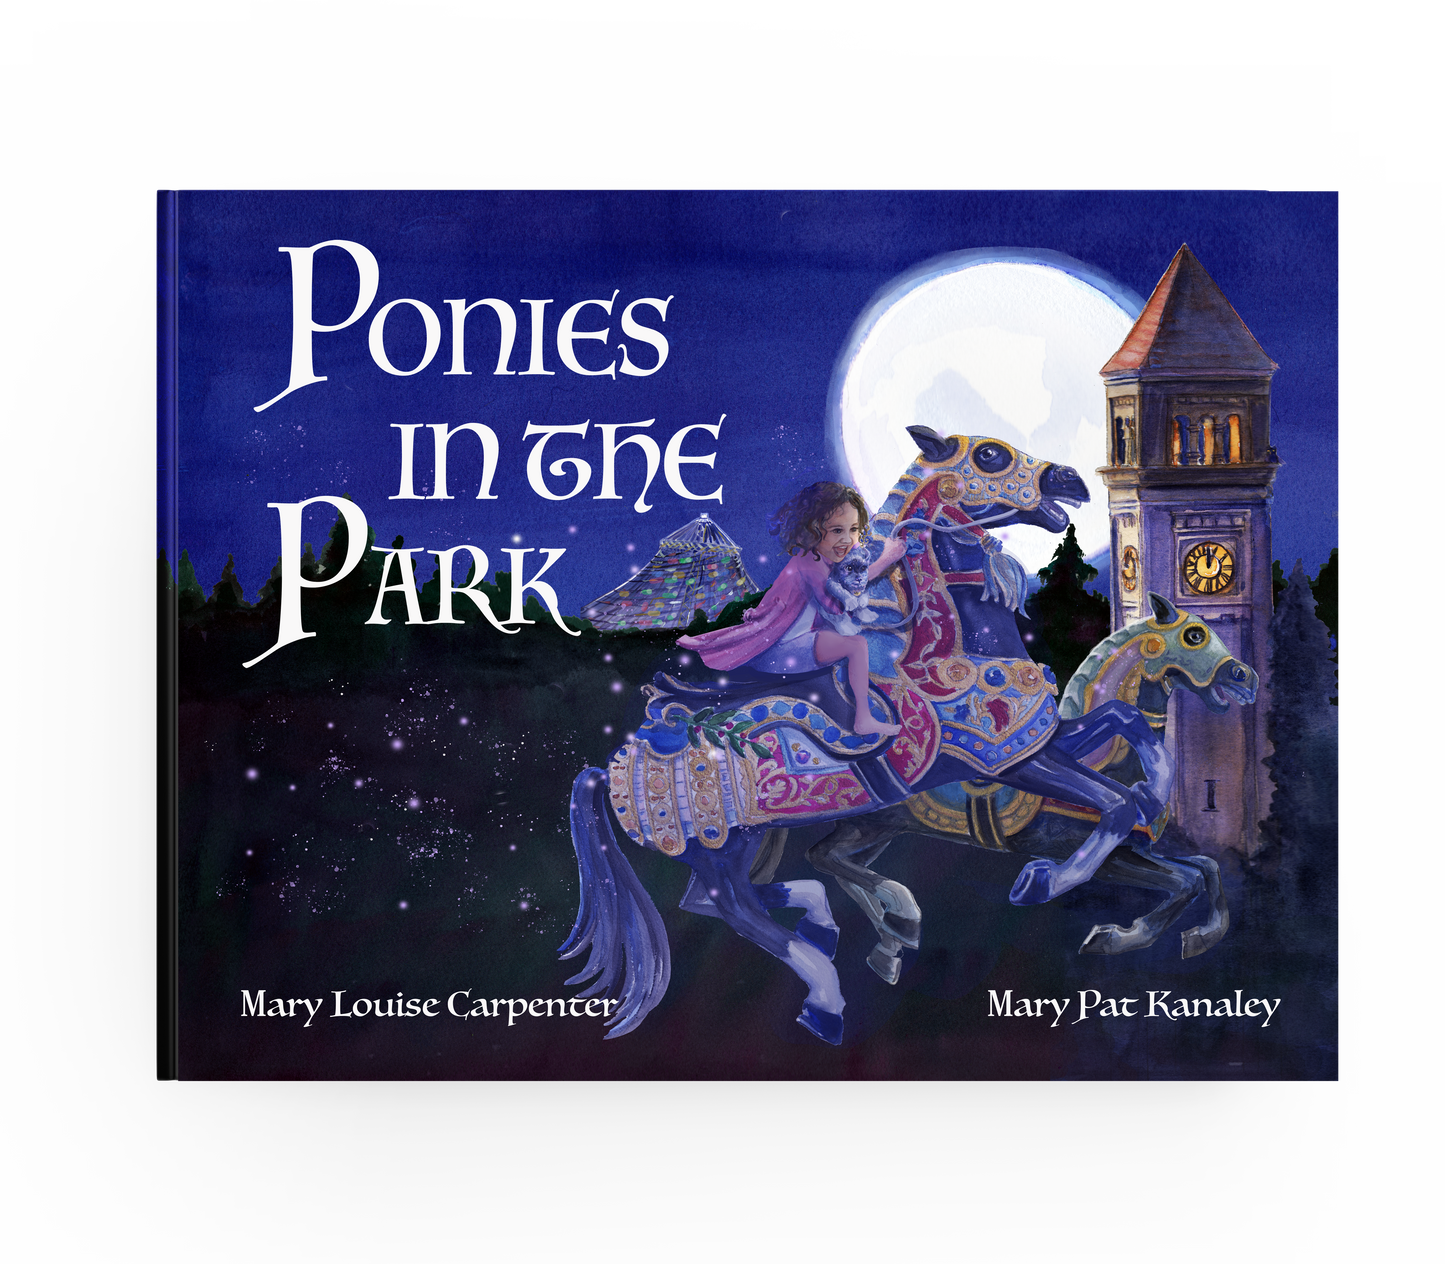 Ponies In The Park-Hard Back Picture Book